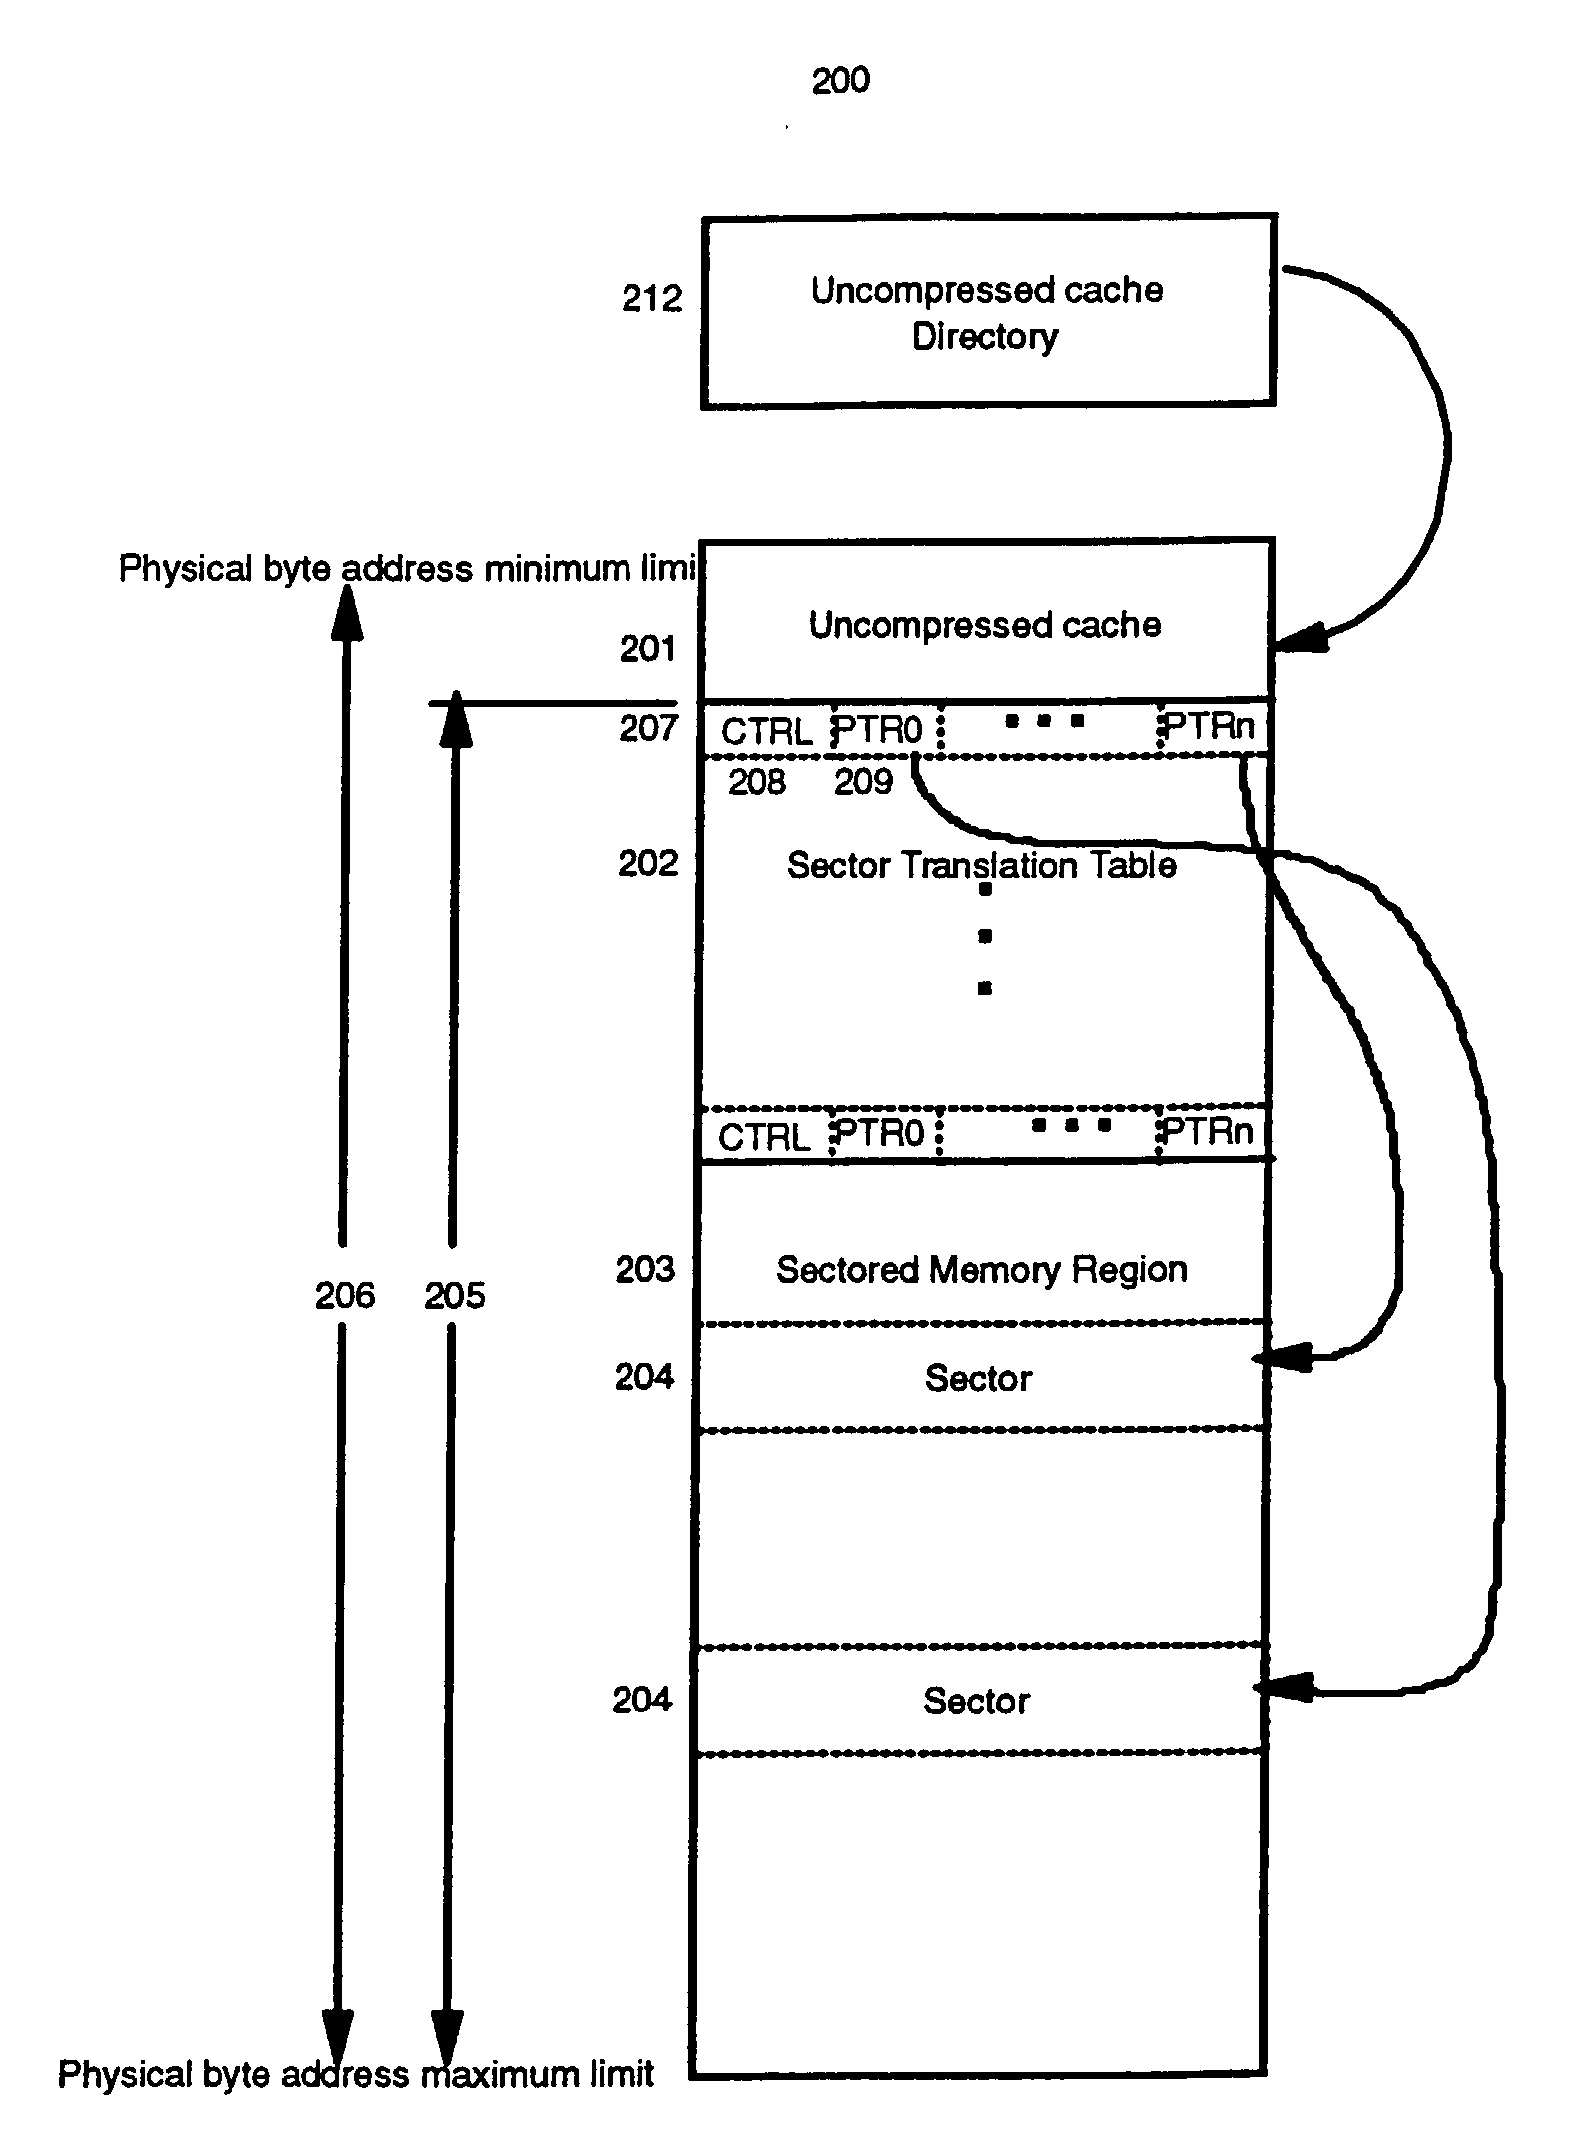 System and method for using a compressed main memory based on degree of compressibility